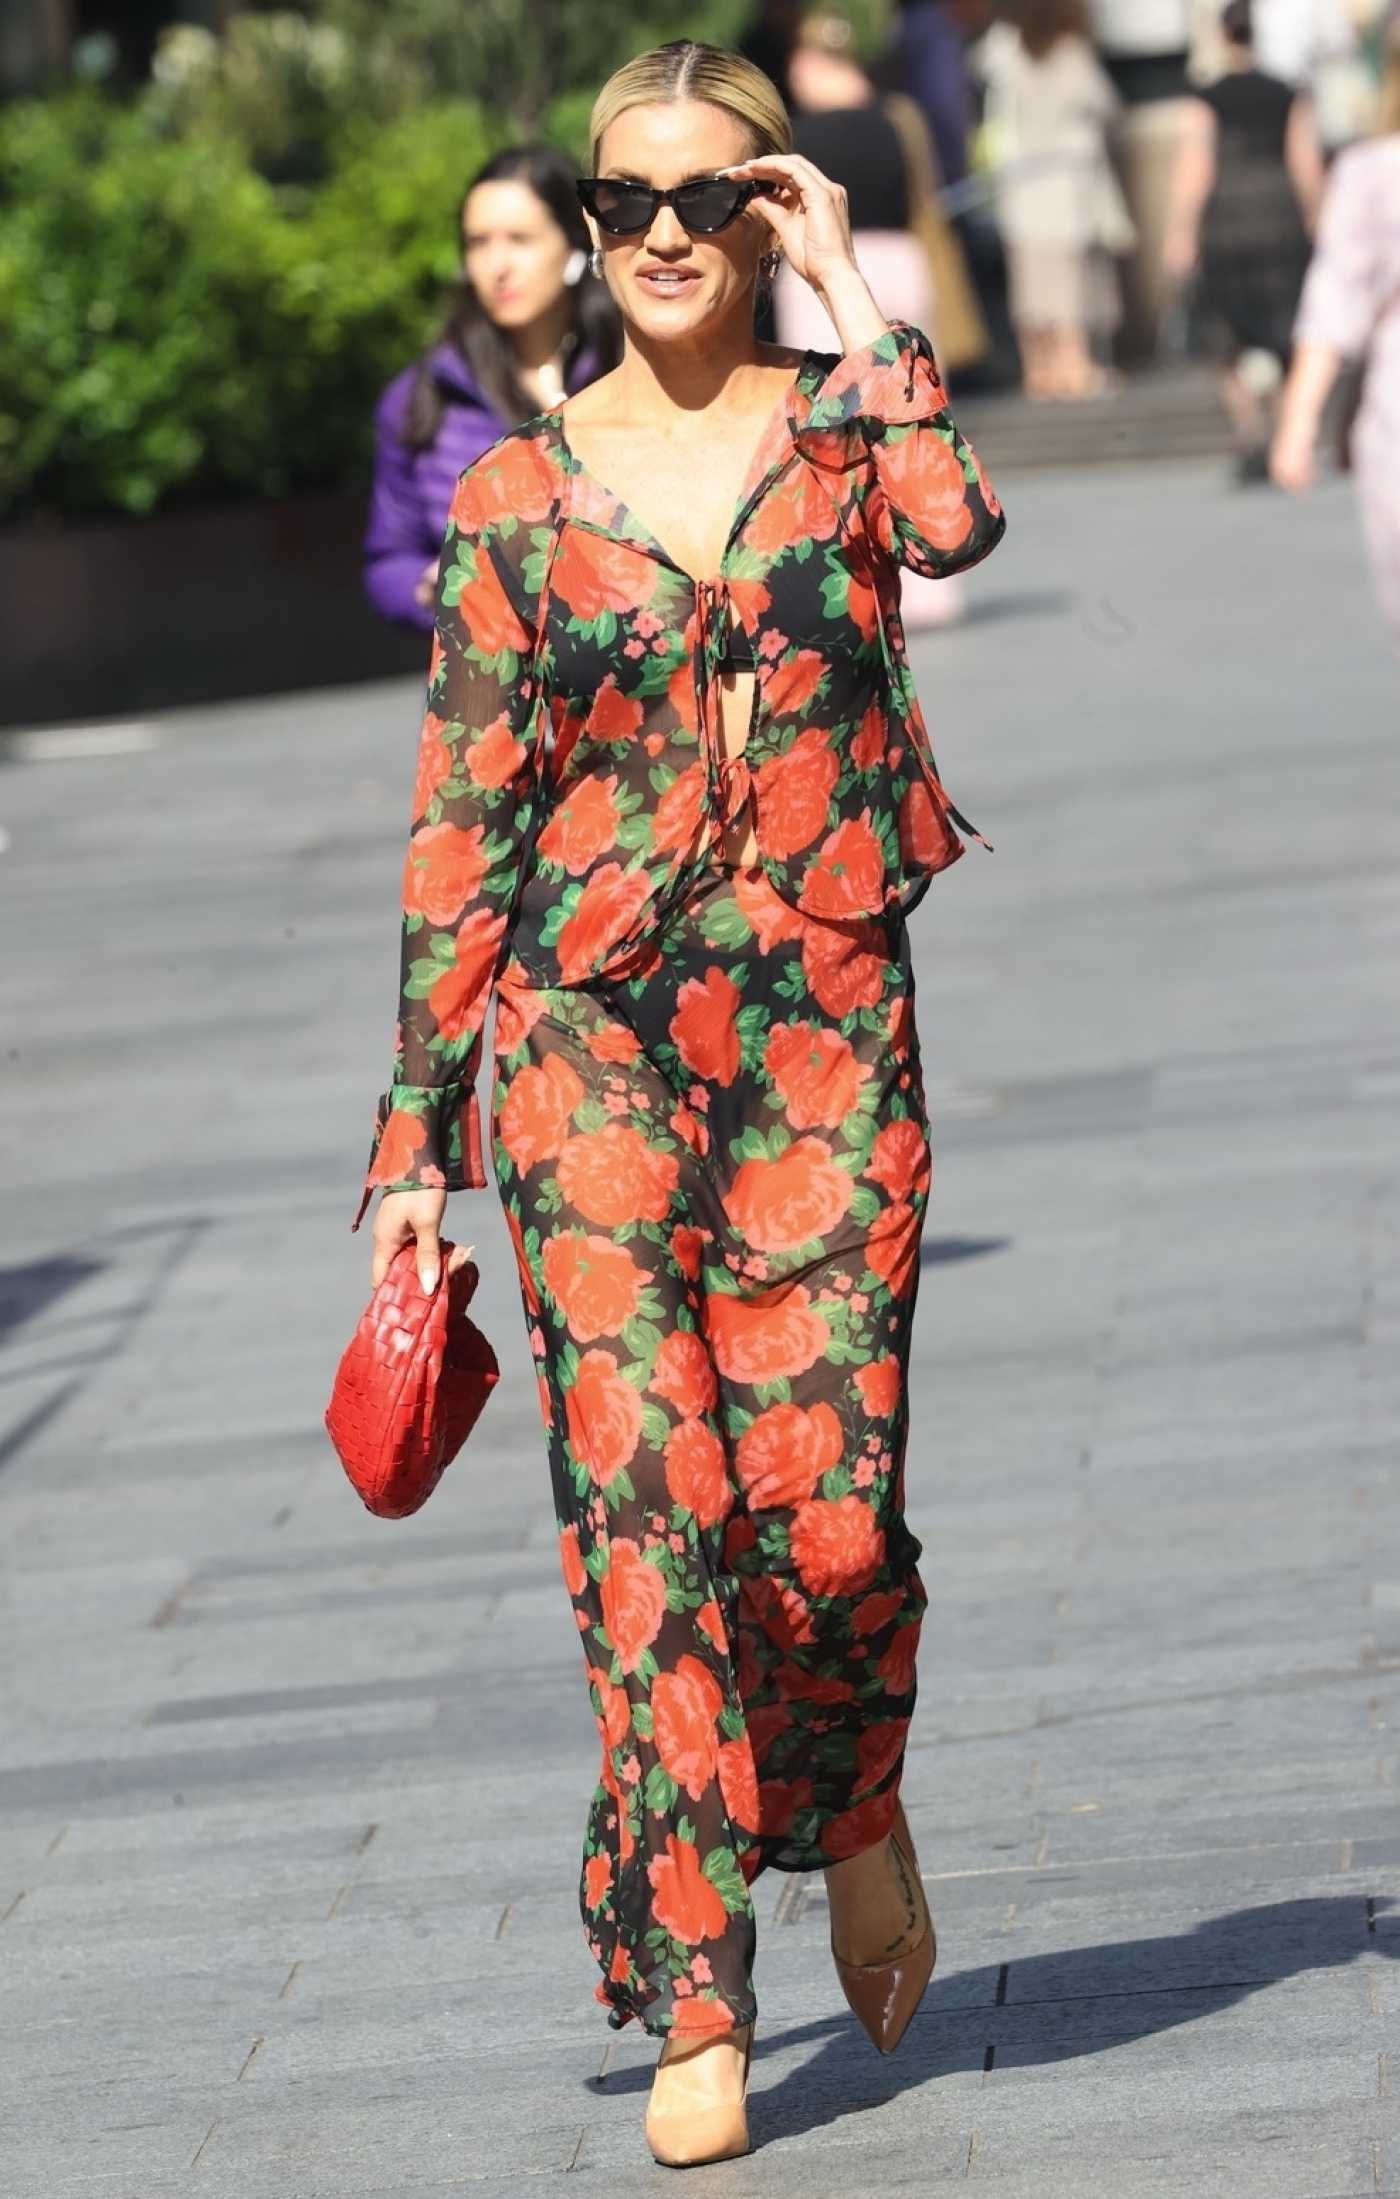 Ashley Roberts in a Floral Ensemble Leaves the Global Studios n London 07/26/2023